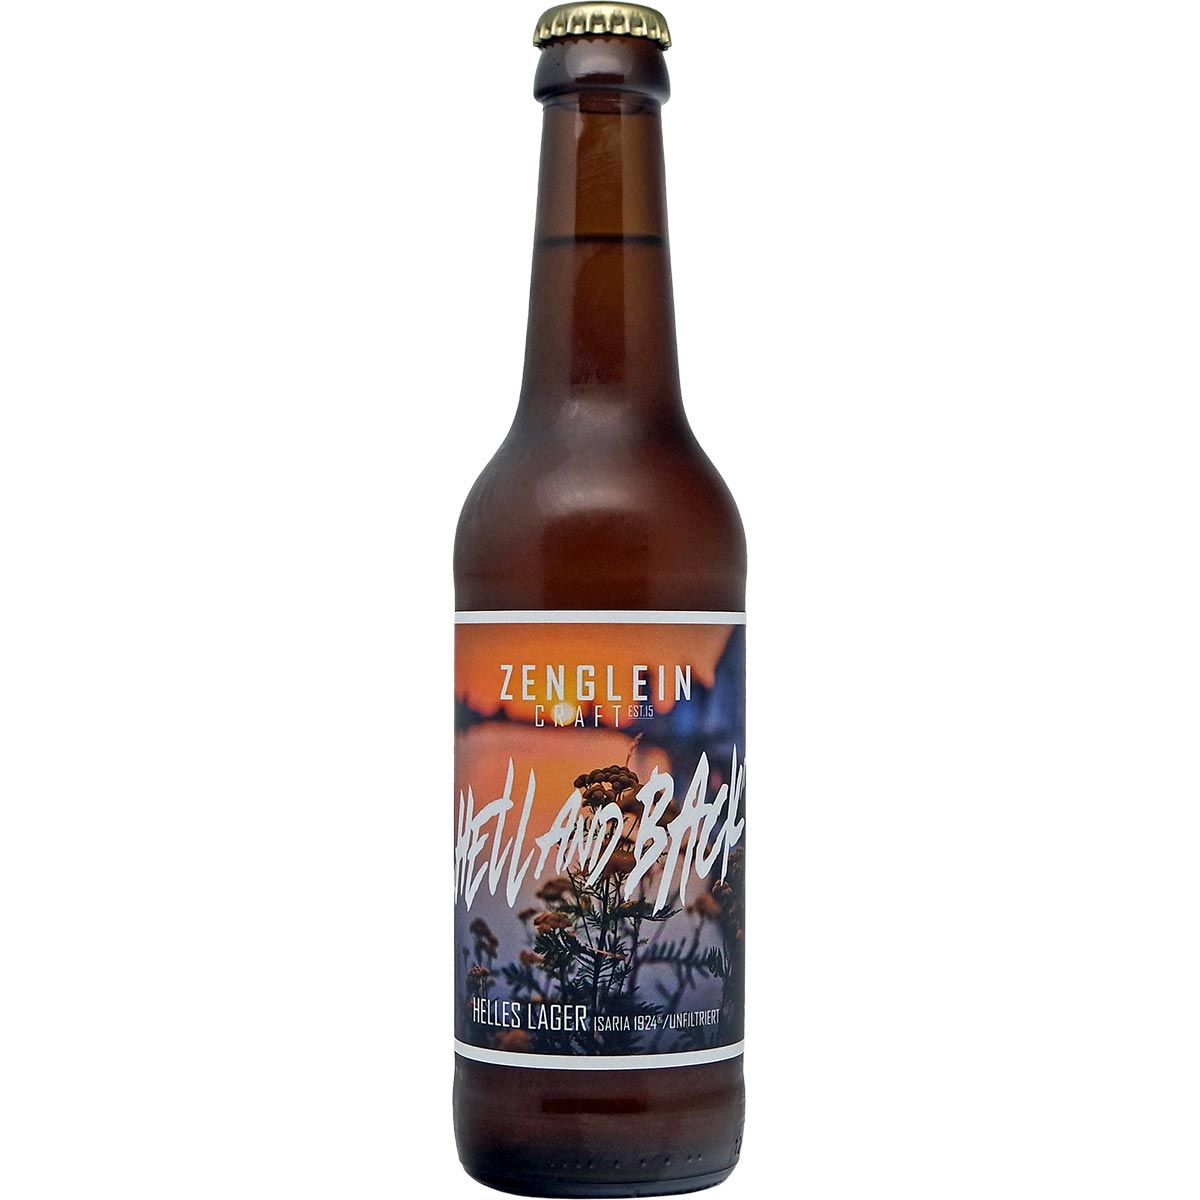 Zenglein Craft Hell and Back Helles Lager kaufen